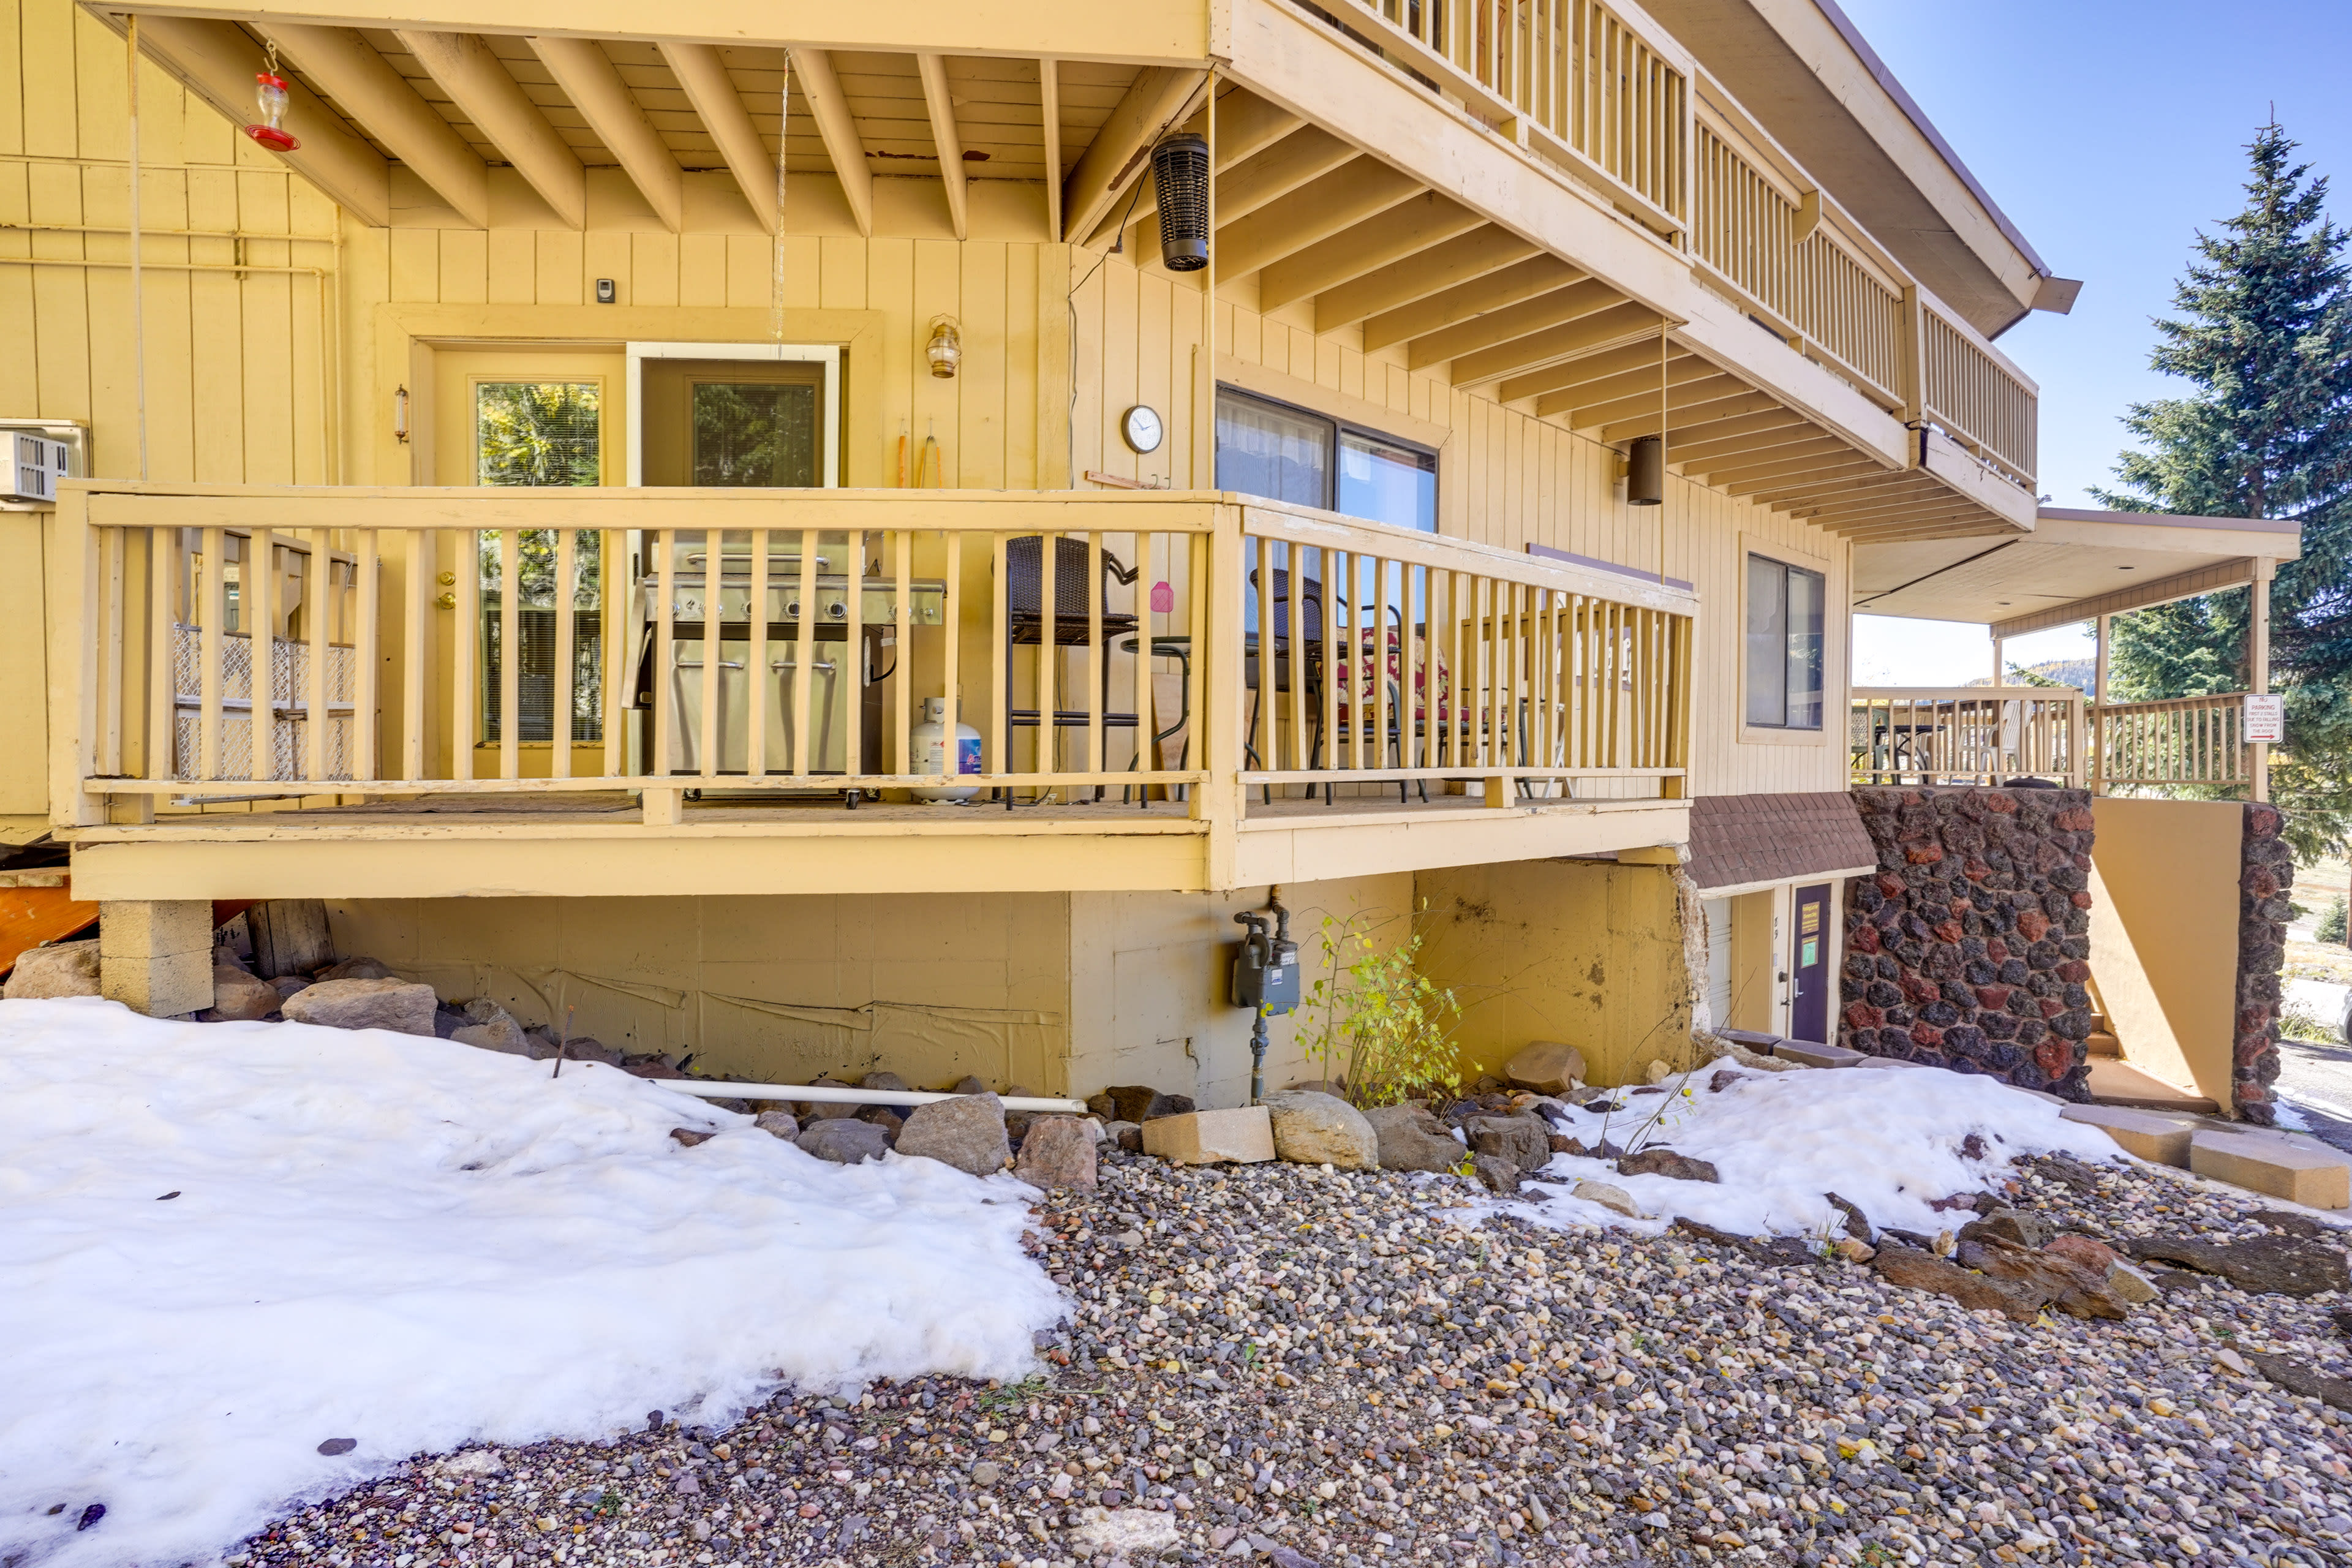 Balcony | Gas Grill (Propane Provided) | Seating | Mountain Views